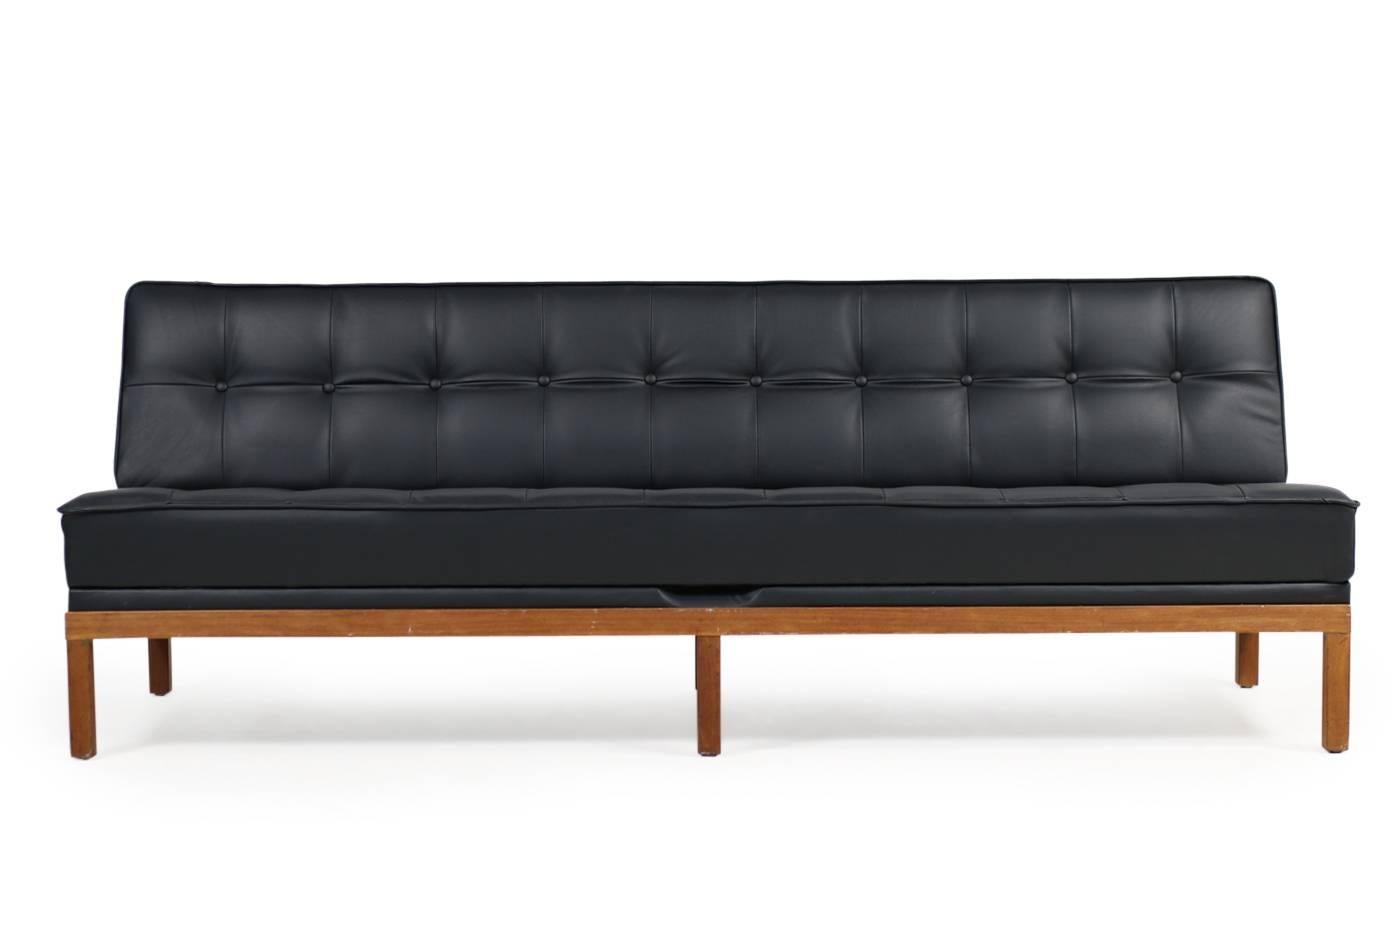 Beautiful 1960s daybed by Johannes Spalt for Wittmann, model Constanze, super rare with the teak wooden base, the upholstery was renewed and the daybed was professionally covered with high quality leather, perfect work, amazing condition, by one